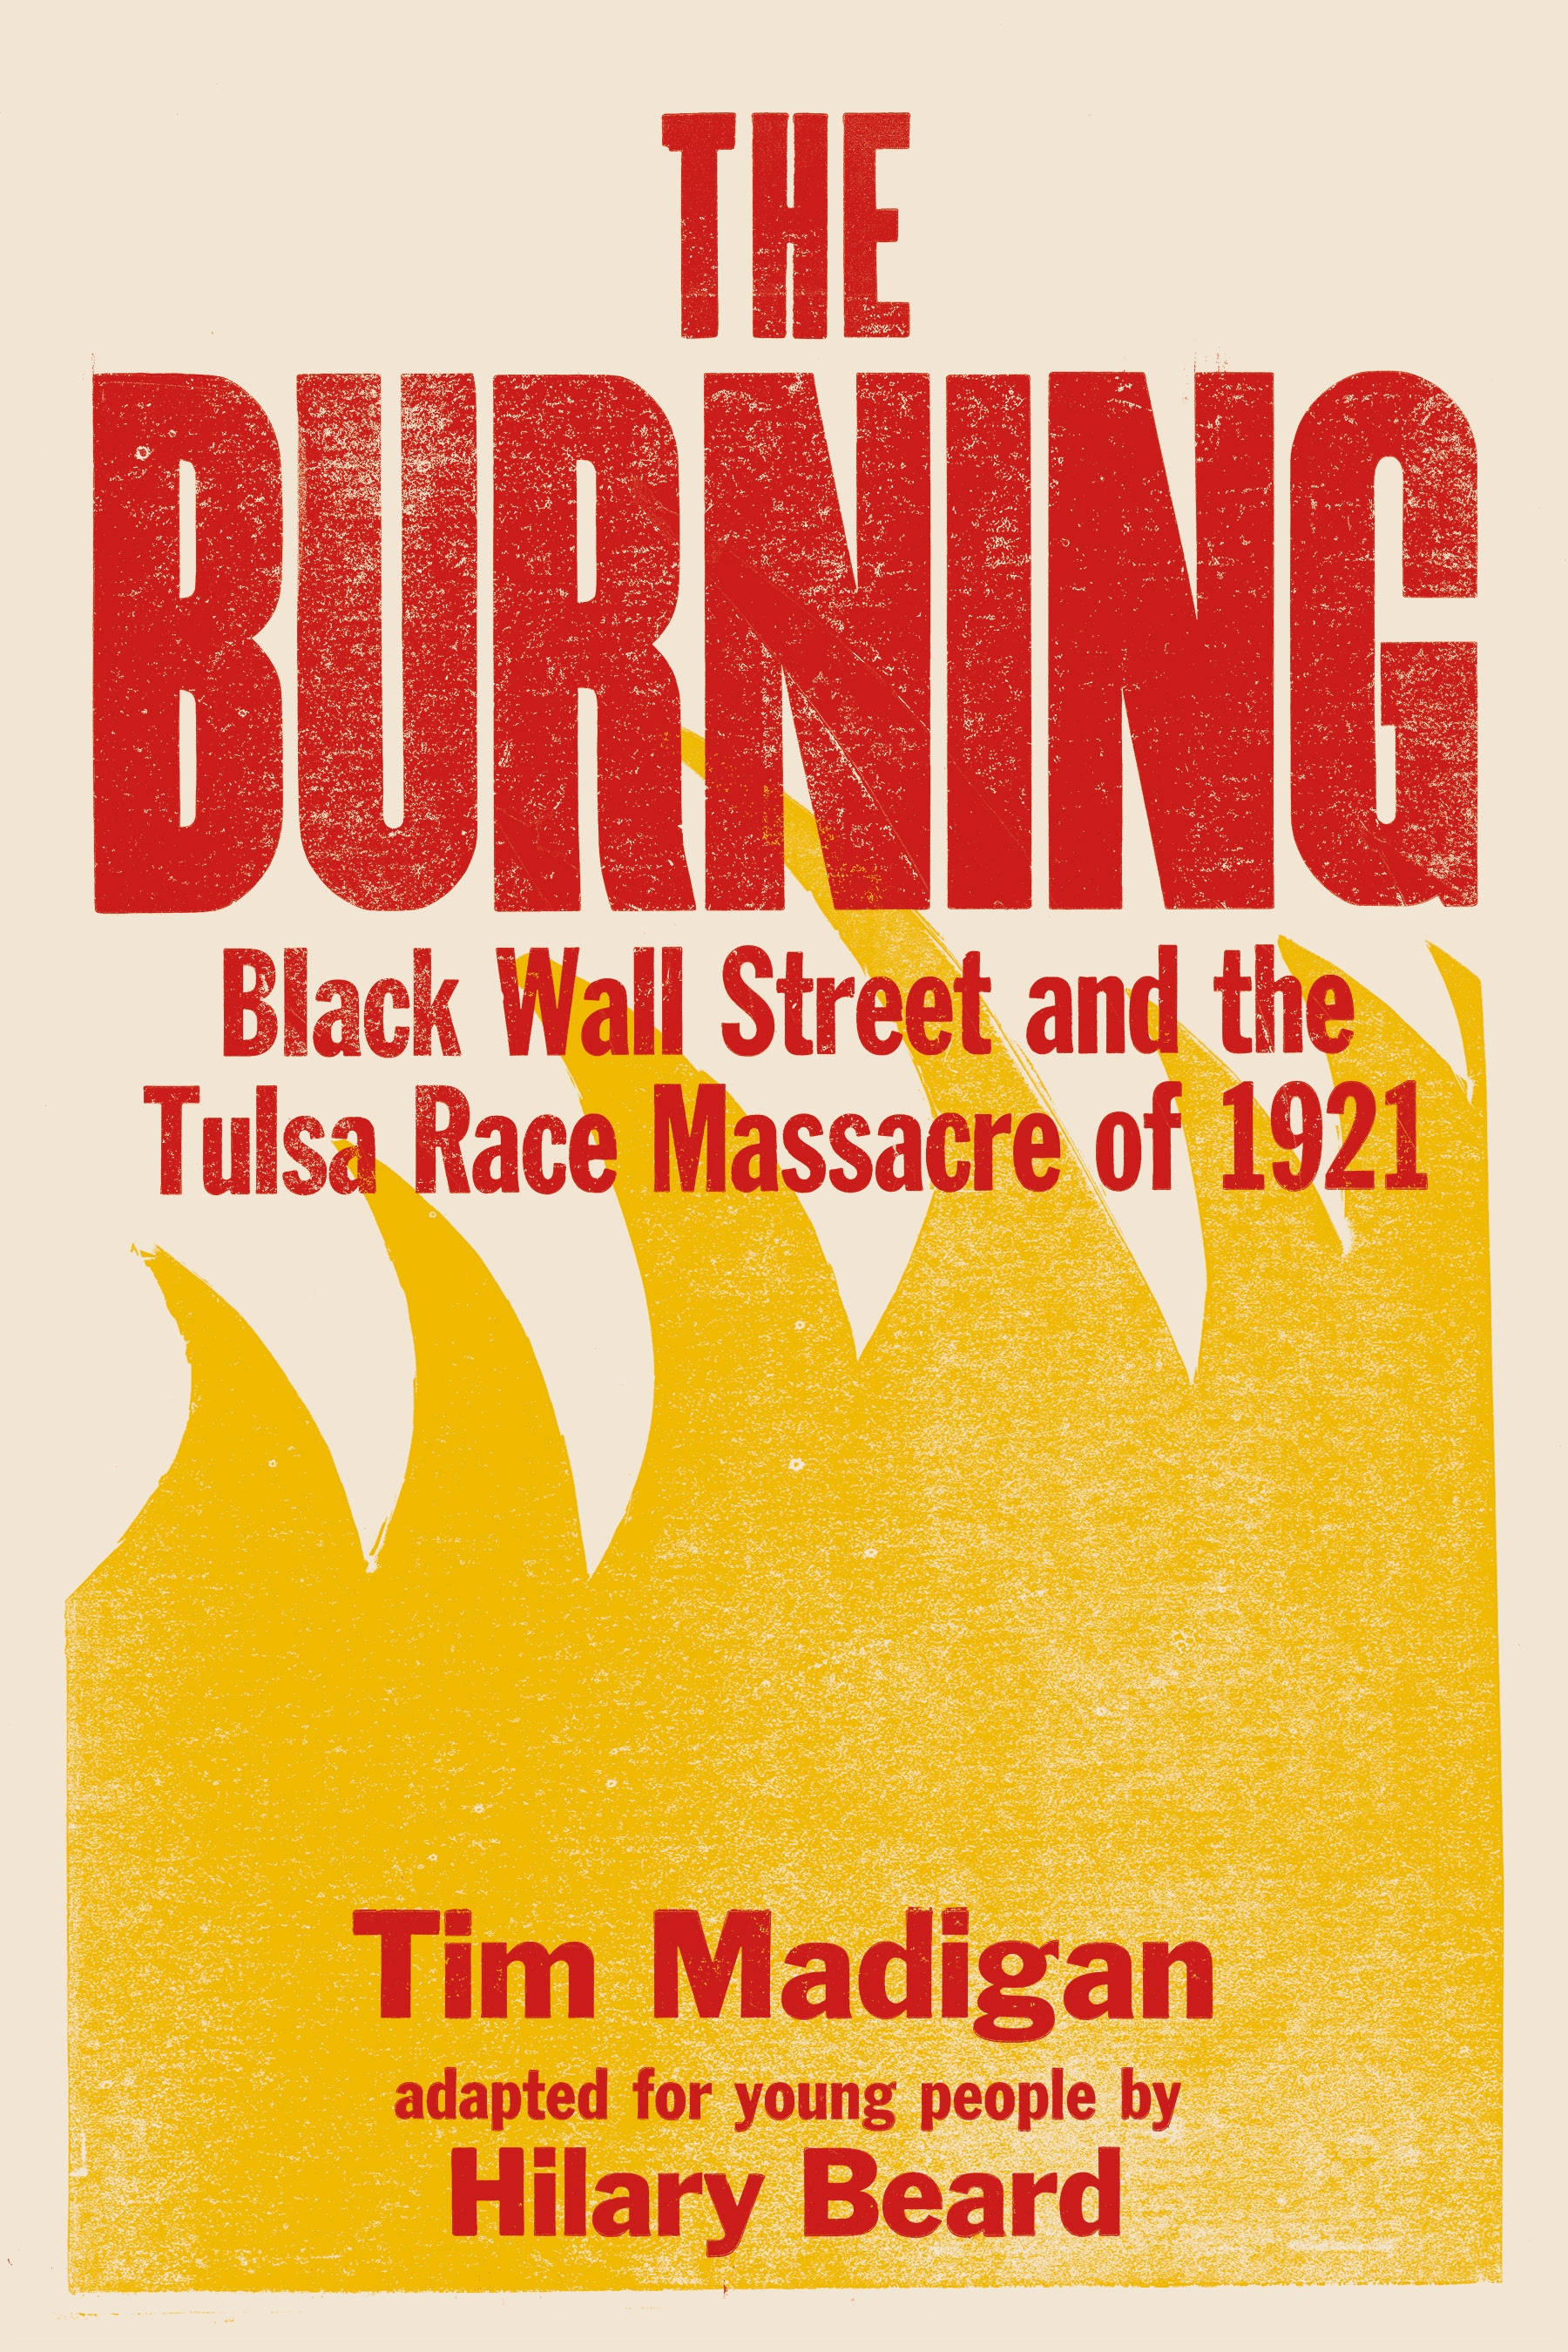 Hilary Beard and Tim Madigan in Conversation on “The Burning” and the Tulsa Race Massacre